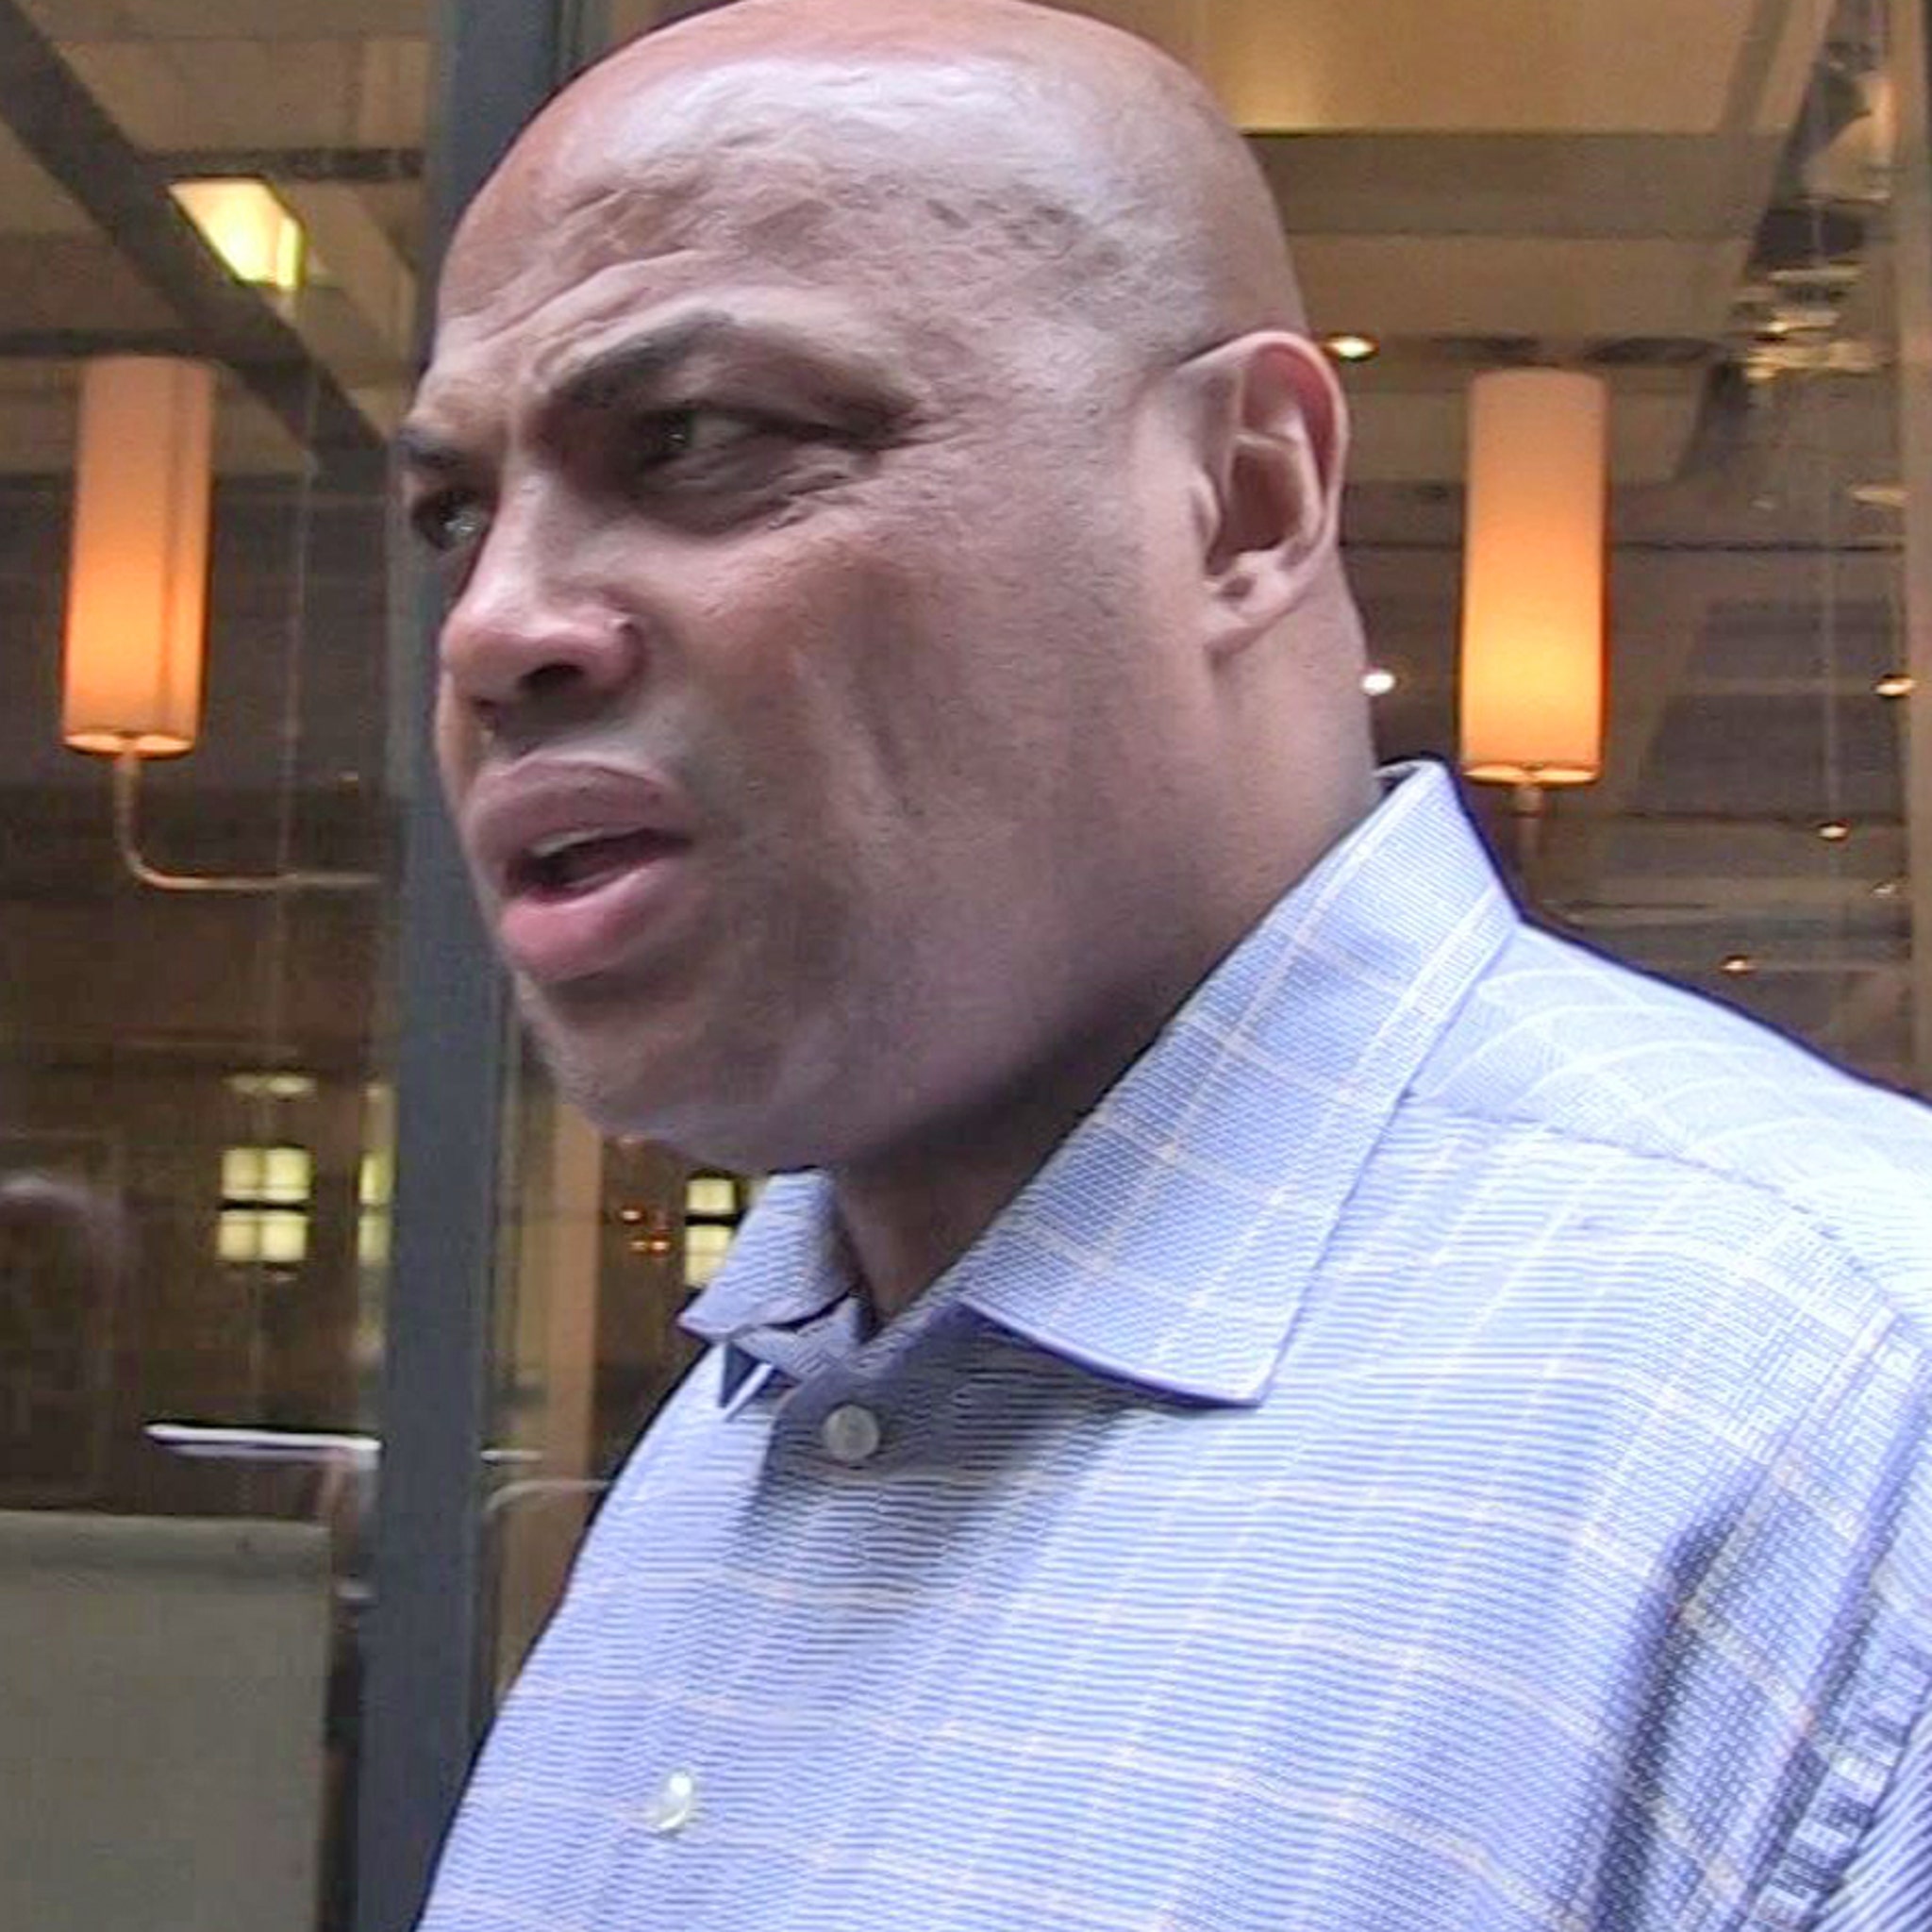 Charles Barkley sorry for 'inappropriate' joke about hitting women